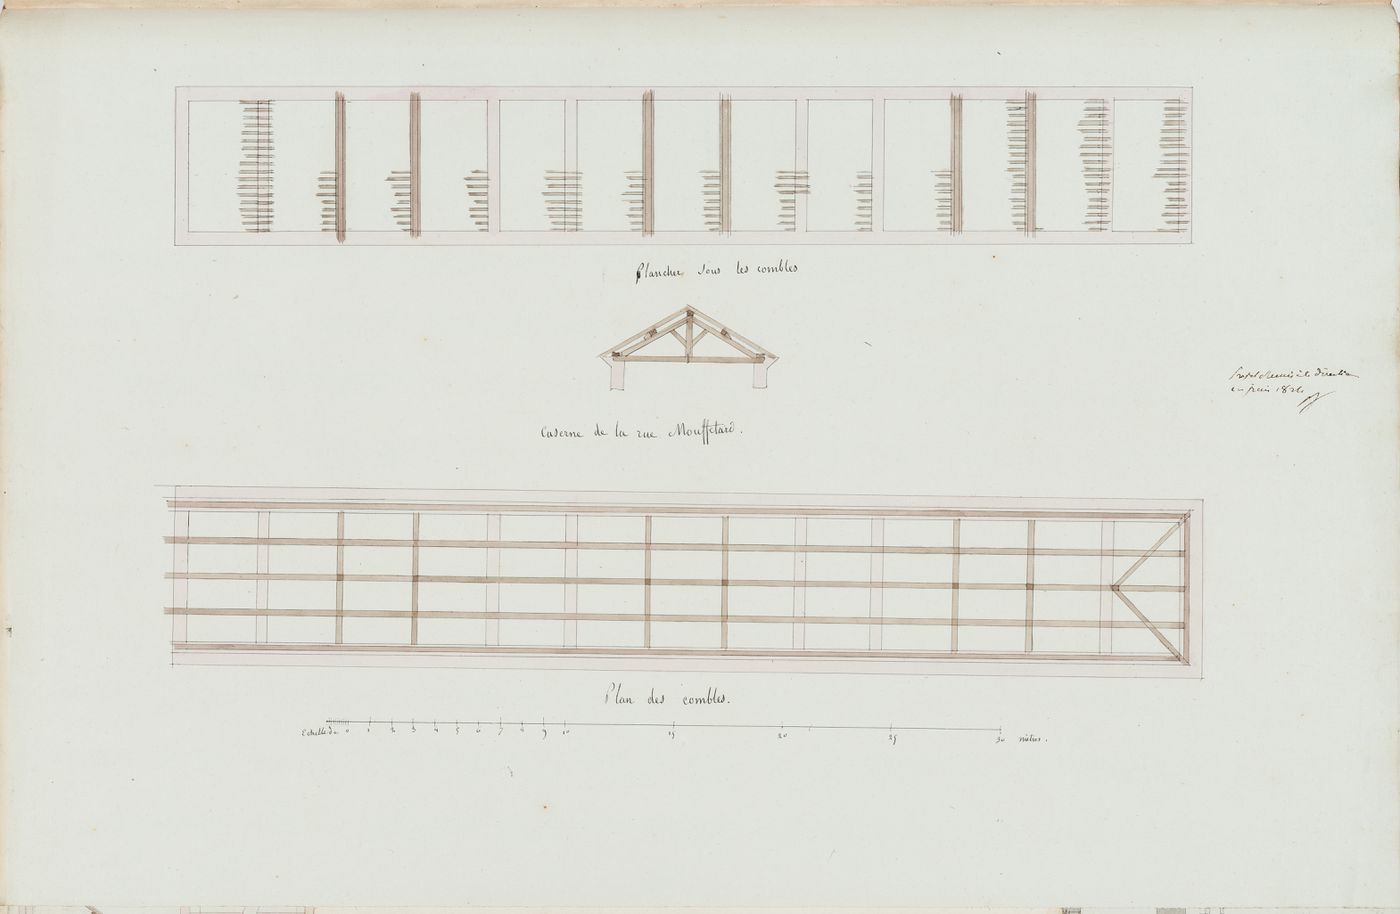 Project for the caserne de la Gendarmerie royale, rue Mouffetard: Plan and section for the roof trusses and a framing plan